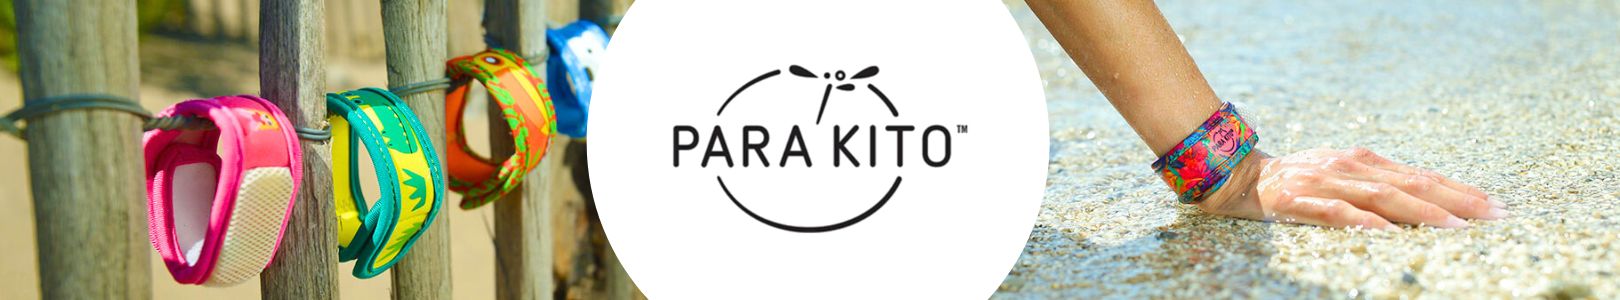 <p style="text-align: center;">PARA'KITO&reg; is a polymer pellet that is housed&nbsp;inside the PARA'KITO&reg; wristbands and clips.&nbsp; It is infused with the essential oils of Geranium, Rosemary, Mint, Peppermint, Clove and&nbsp;Cinnamon reducing your mosquito appeal.</p>
<p style="text-align: center;">The fresh fragrance of the oils stays effective&nbsp;for up to 15 days once opened.&nbsp;&nbsp;<strong>No DEET</strong>,<strong> no alcoho</strong>l and <strong>no paraben</strong>s avoids&nbsp;any reactions and skin irritation issues.</p>
<p style="text-align: center;">Made of cool, comfy neoprene the PARA'KITO&reg;<strong> Adult Wristband</strong> (25cm long) and <strong>Kids Wristband</strong> (21cm long) are completely waterproof - the perfect anti mosquito solution no matter the destination.</p>
<p style="text-align: center;">Practical, lightweight and waterproof you can snap your PARA'KITO&reg;<strong> Clip</strong>&nbsp;onto just about anything -&nbsp;bags, prams, shoes even dog collars.</p>
<p style="text-align: center;">PARA'KITO&reg;<strong> Bite Relief Gel</strong> is specially formulated to relieve bites made by mosquitoes and other biting insects. The formulation of soothing plant extracts and wood essential oils is pleasant and natural.&nbsp;</p>
<p></p>
<p style="text-align: center;"><br><br></p>